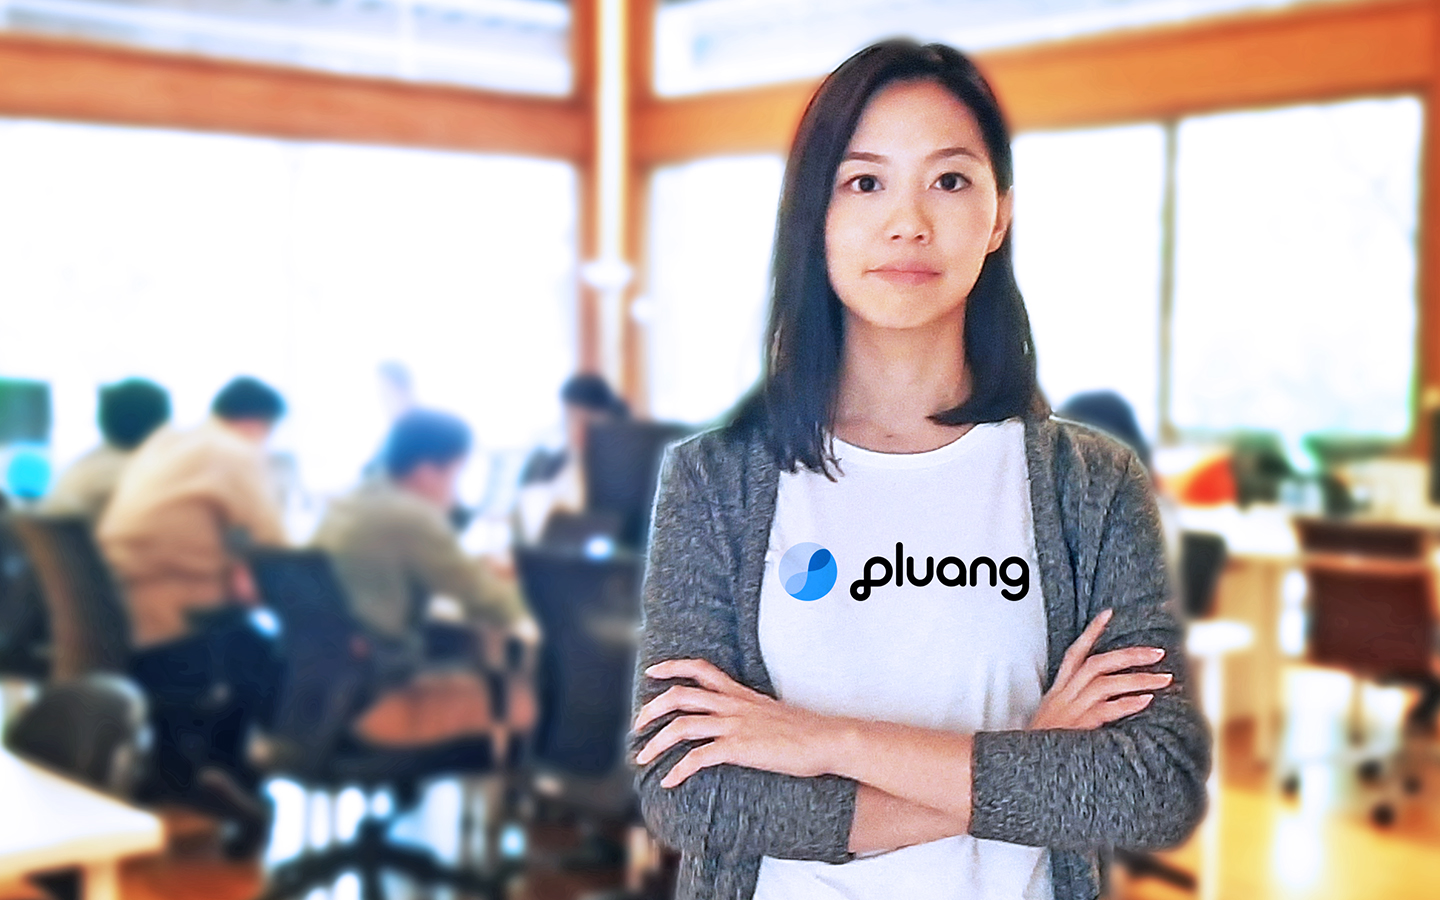 Personal wealth-building app Pluang raises USD 35 million amid investment frenzy in Indonesia